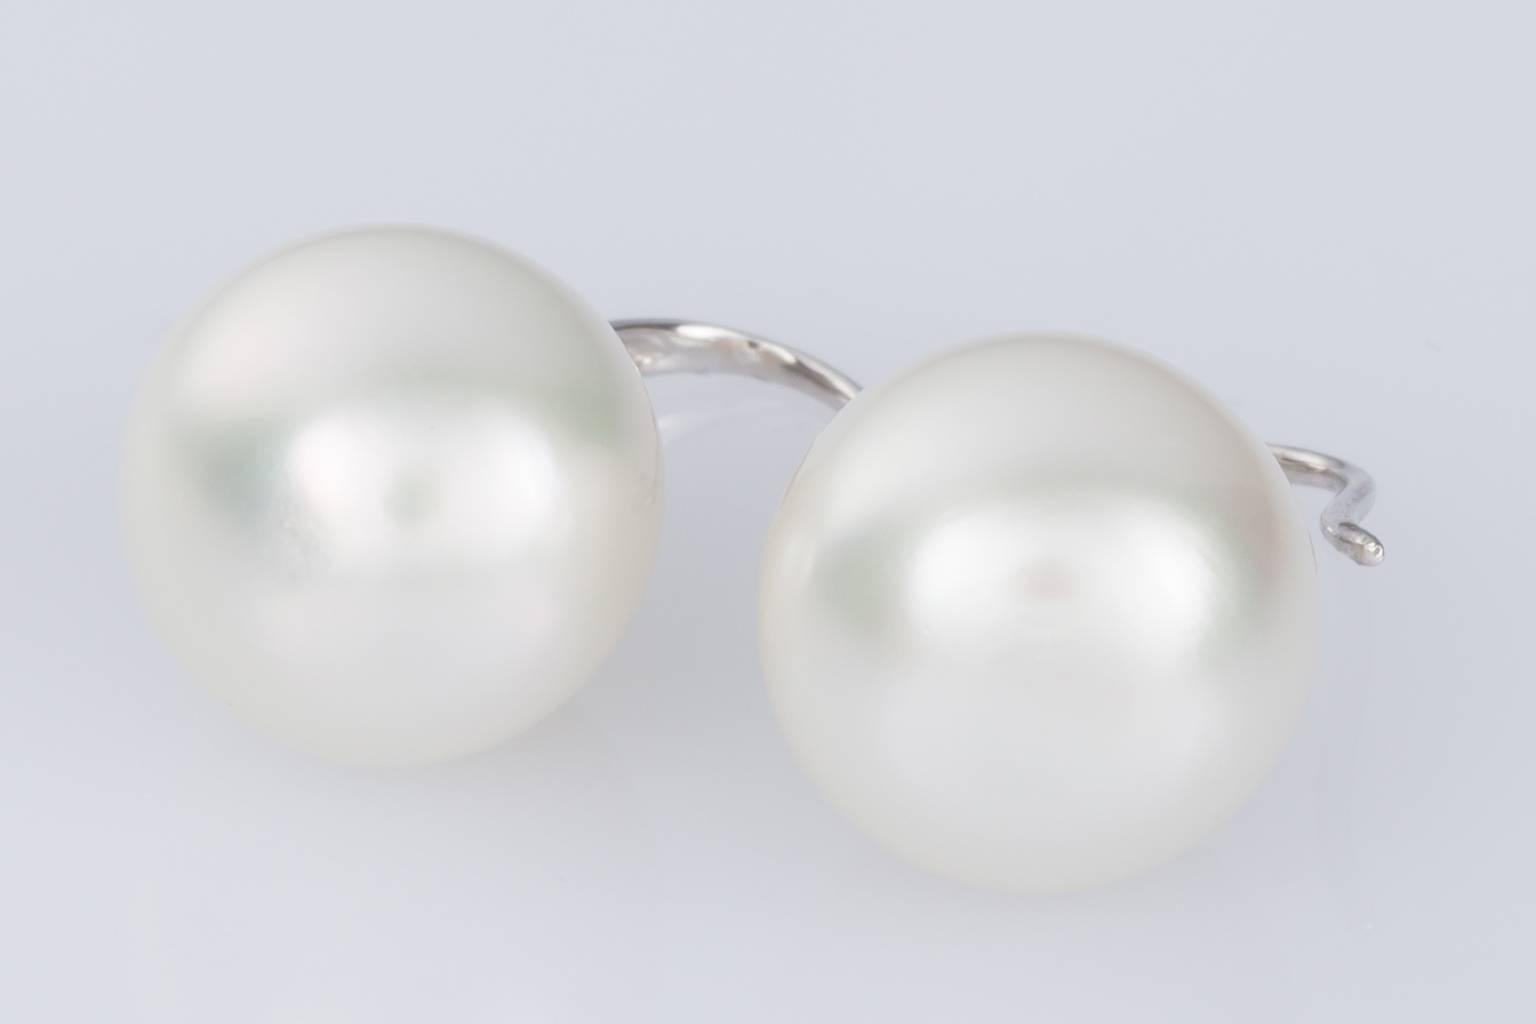 A beautiful pair of South Sea Pearl drop earrings that are elegant and unpretentious. The white bell shaped pearls measure 12.5mm to 12.9mm and are suspended from 18k white gold fluted panels and shepherd hook fittings. 
The pearls have a lovely